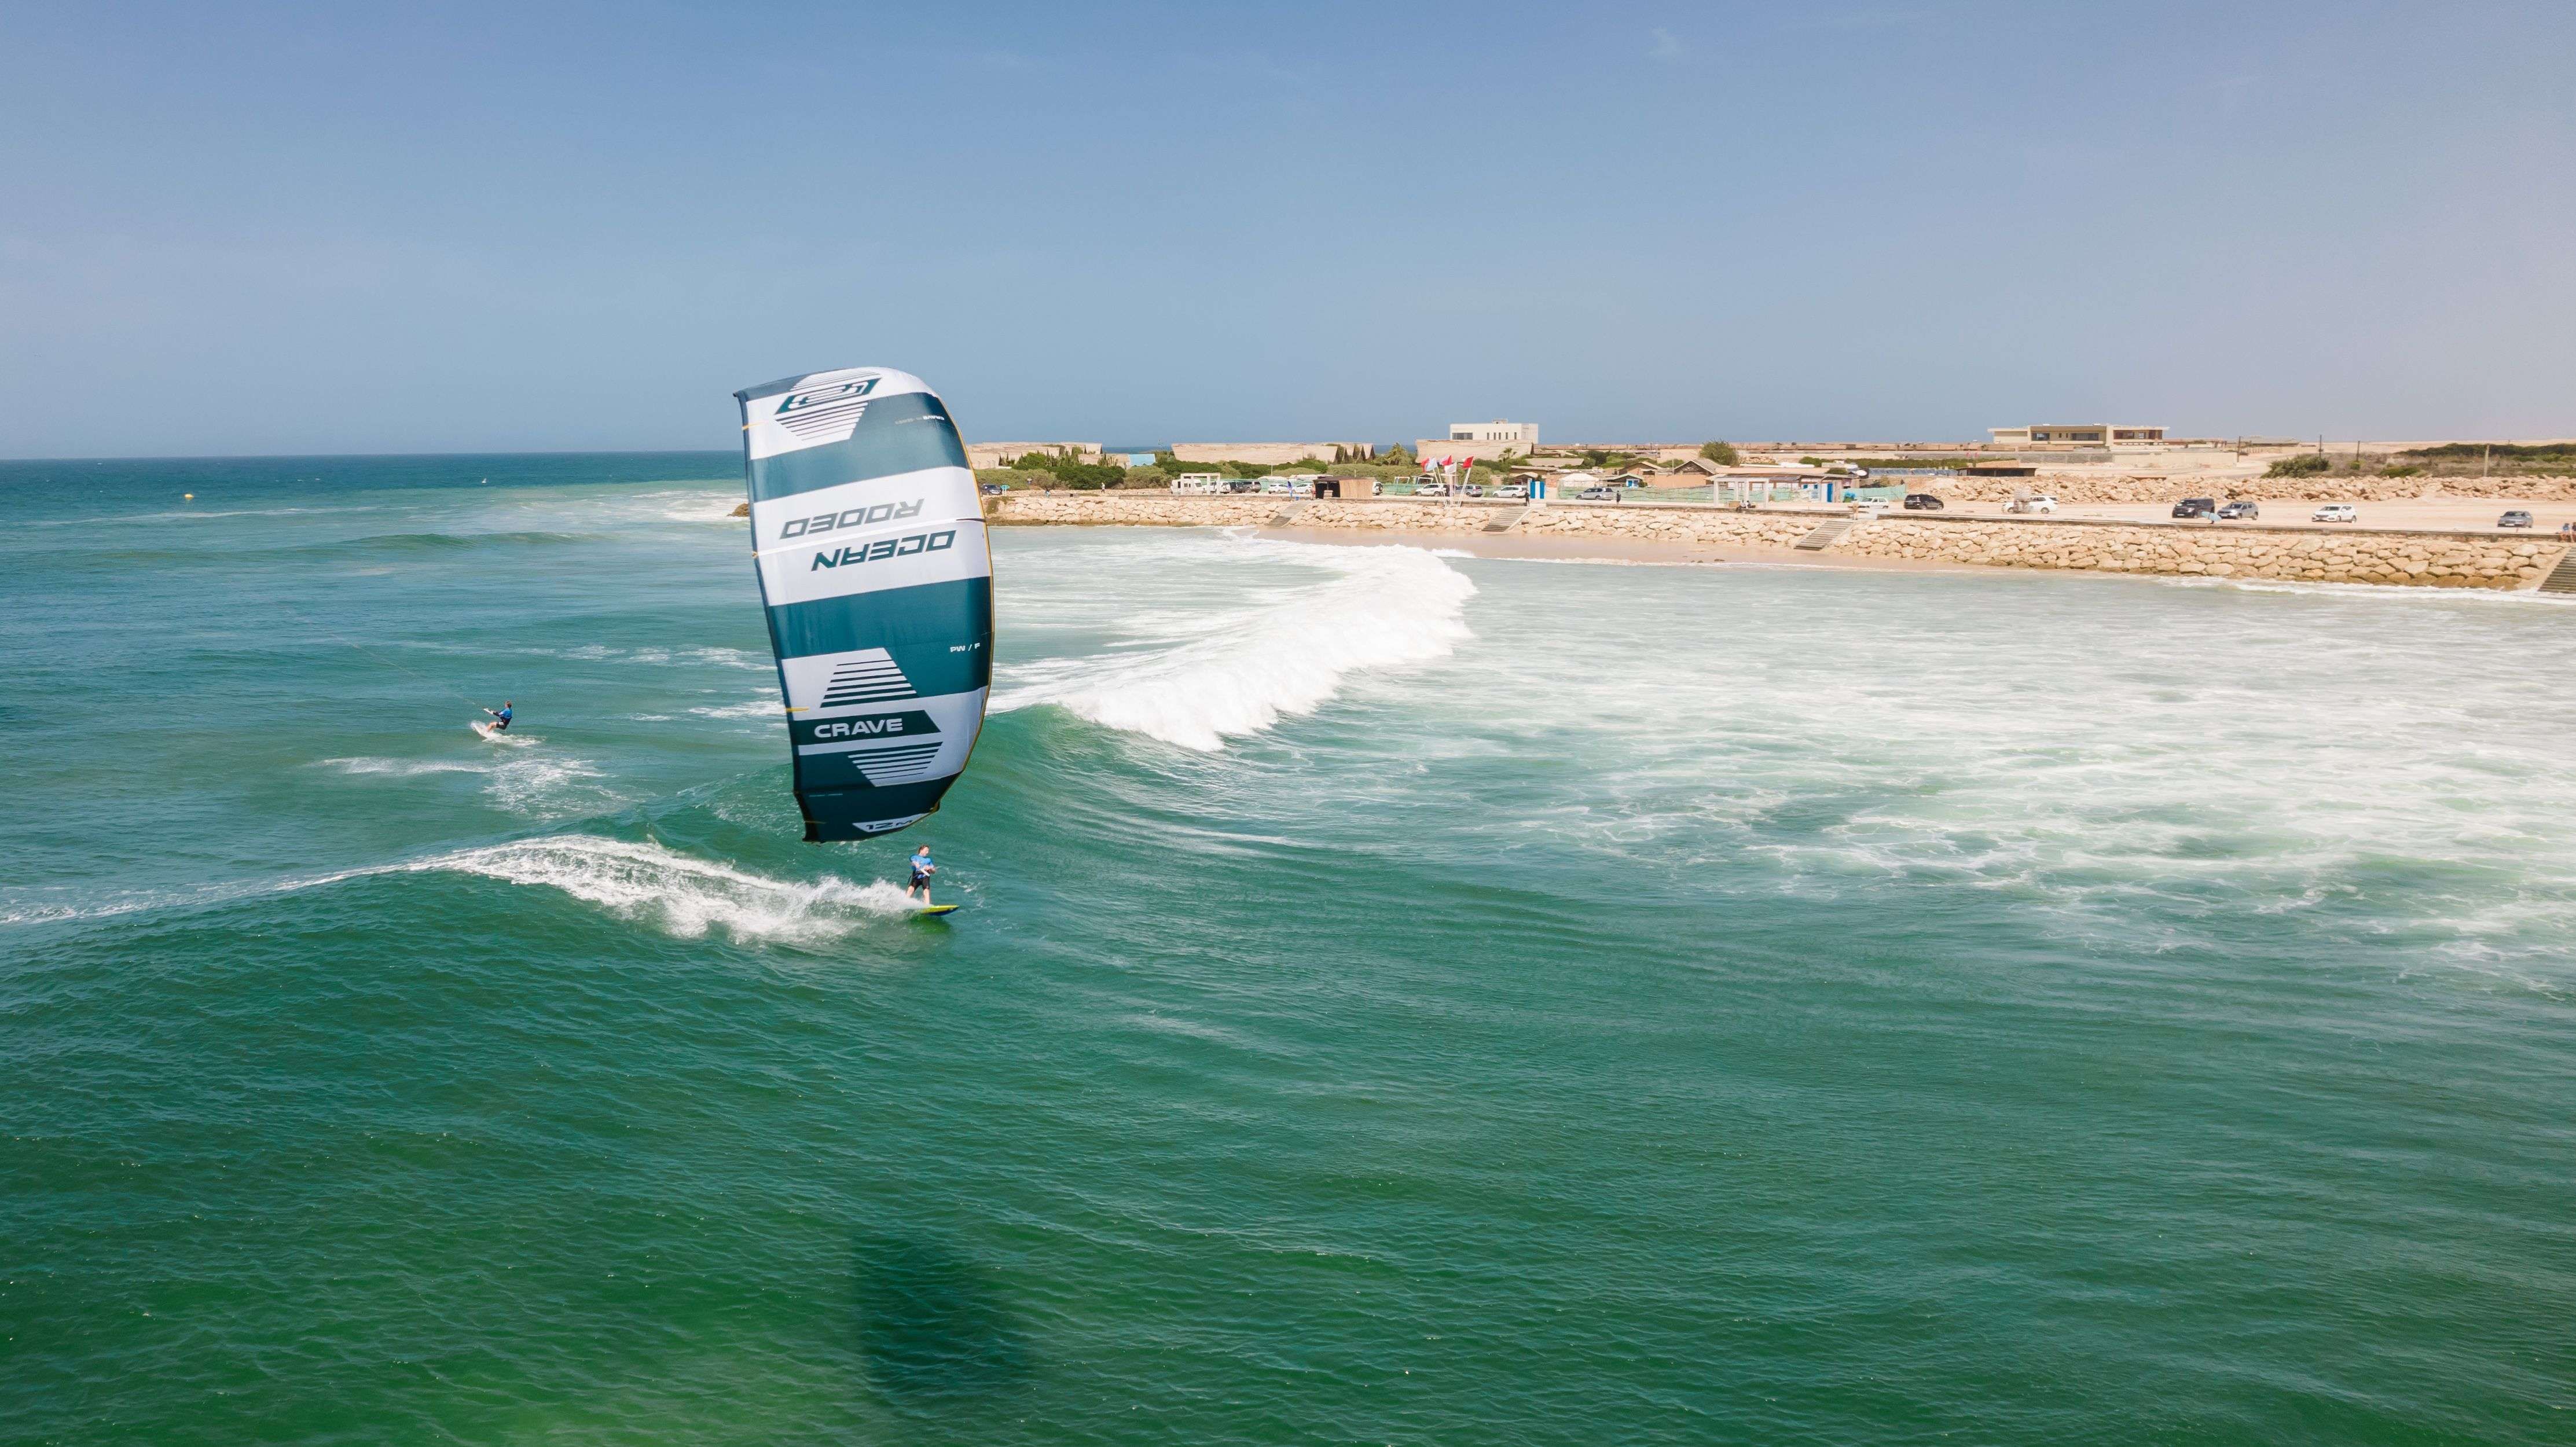 The waves are back! - GKA Kite-Surf World Cup Dakhla Day 1